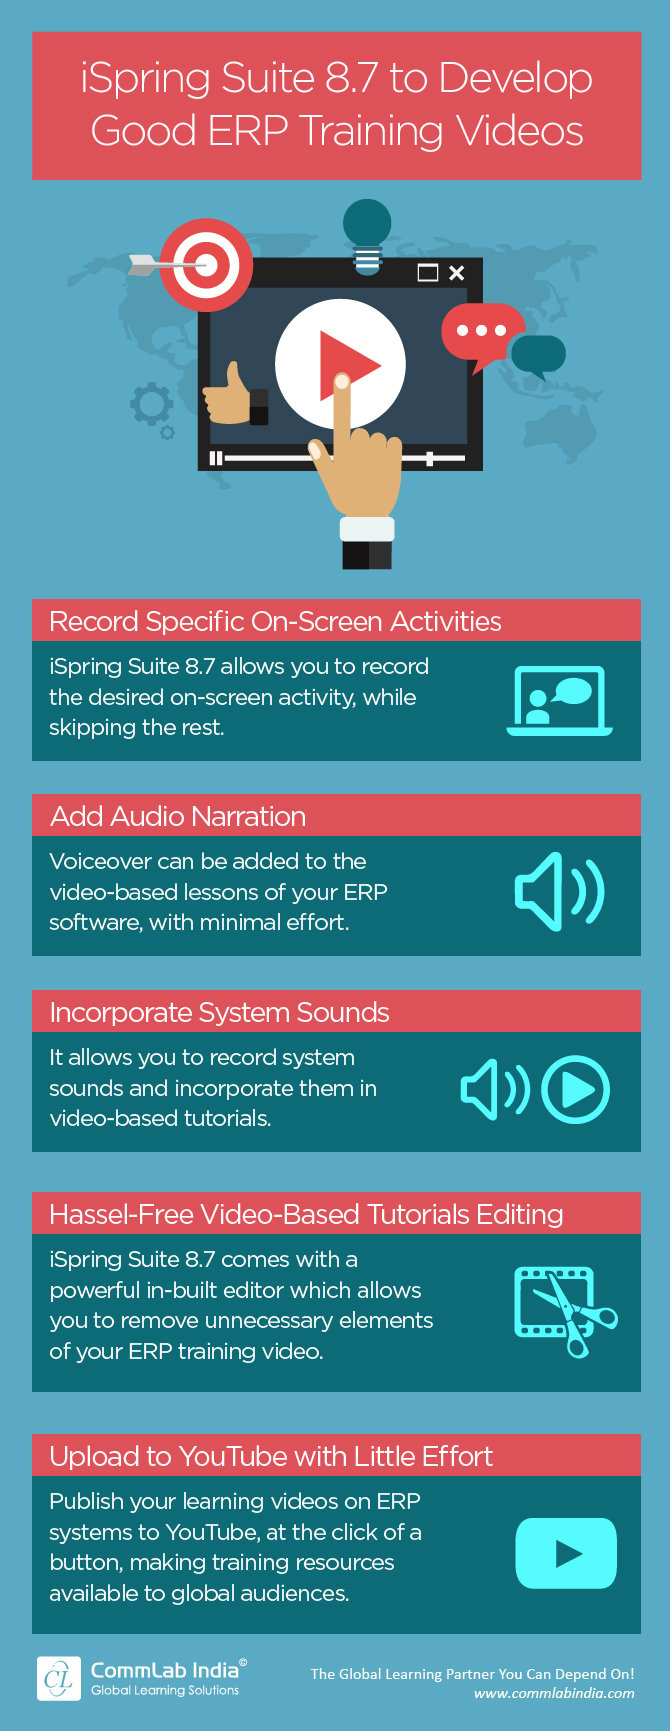 iSpring Suite 8.7 to Develop Good ERP Training Videos [Infographic]